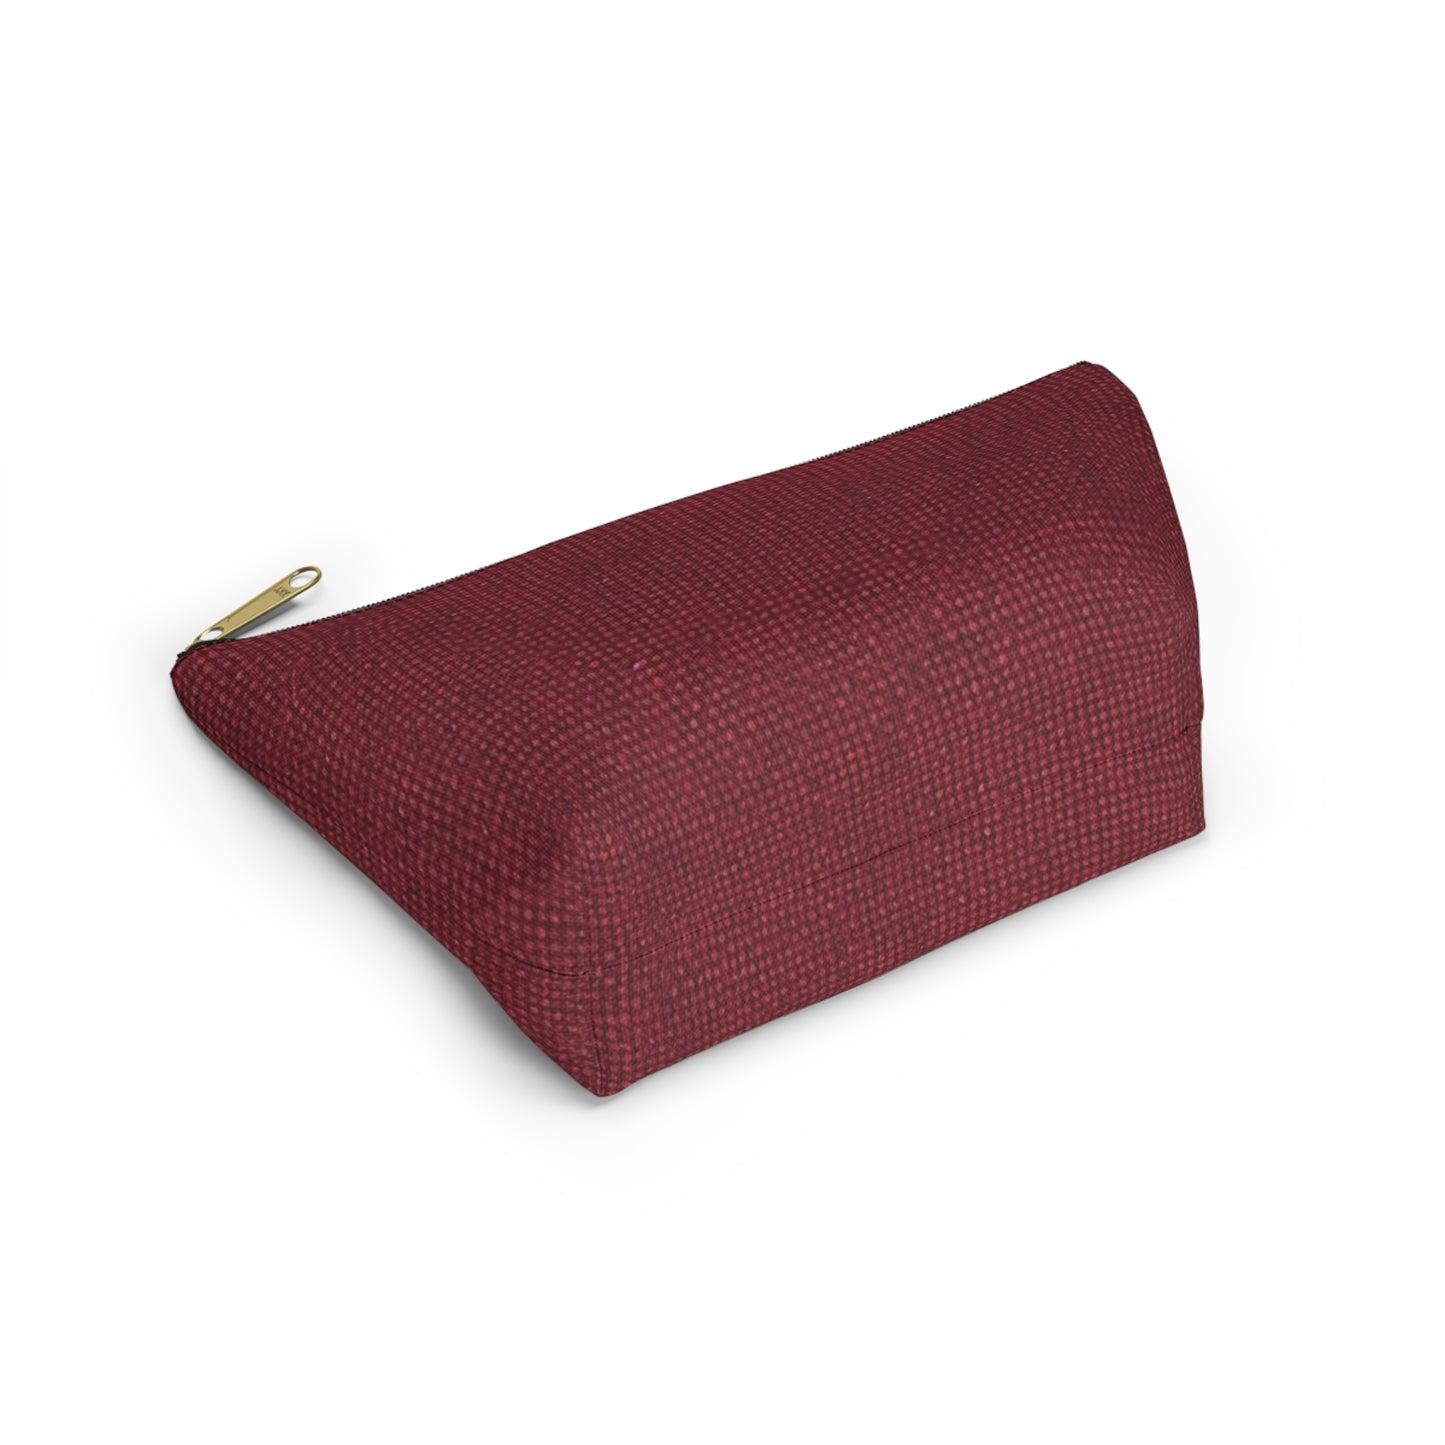 Seamless Texture - Maroon/Burgundy Denim-Inspired Fabric - Accessory Pouch w T-bottom